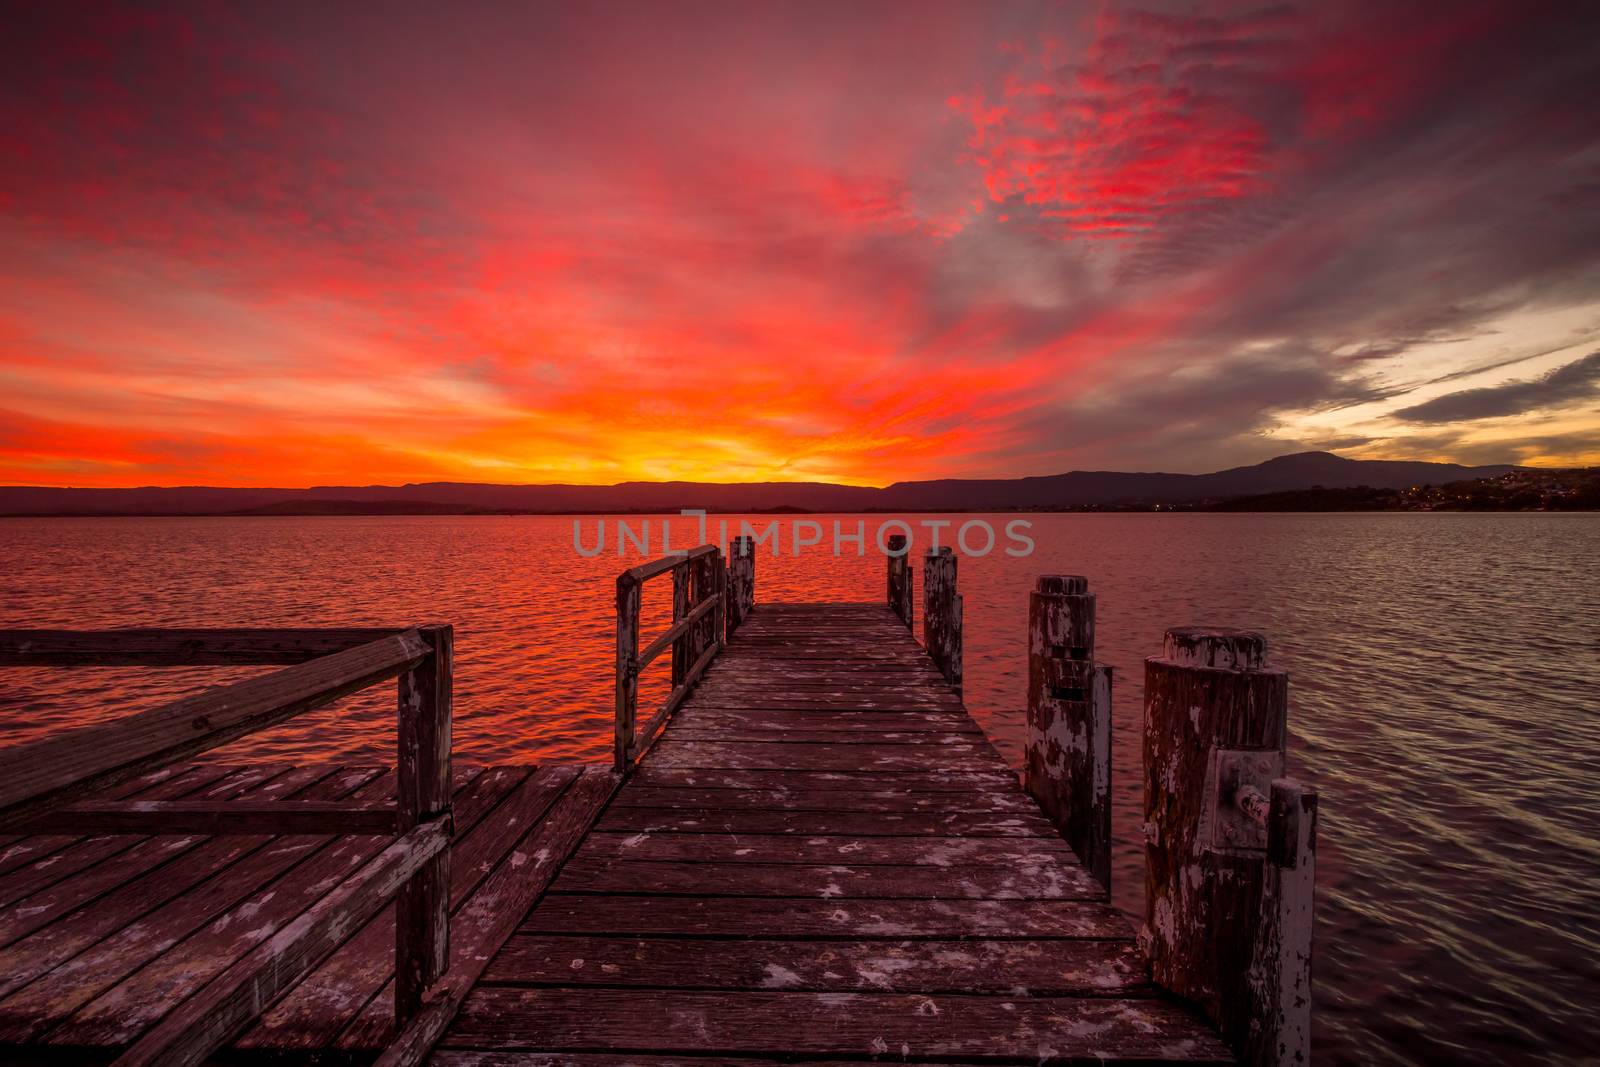 Burning red fiery sunset across Lake Illawarra with rustic timber jetty